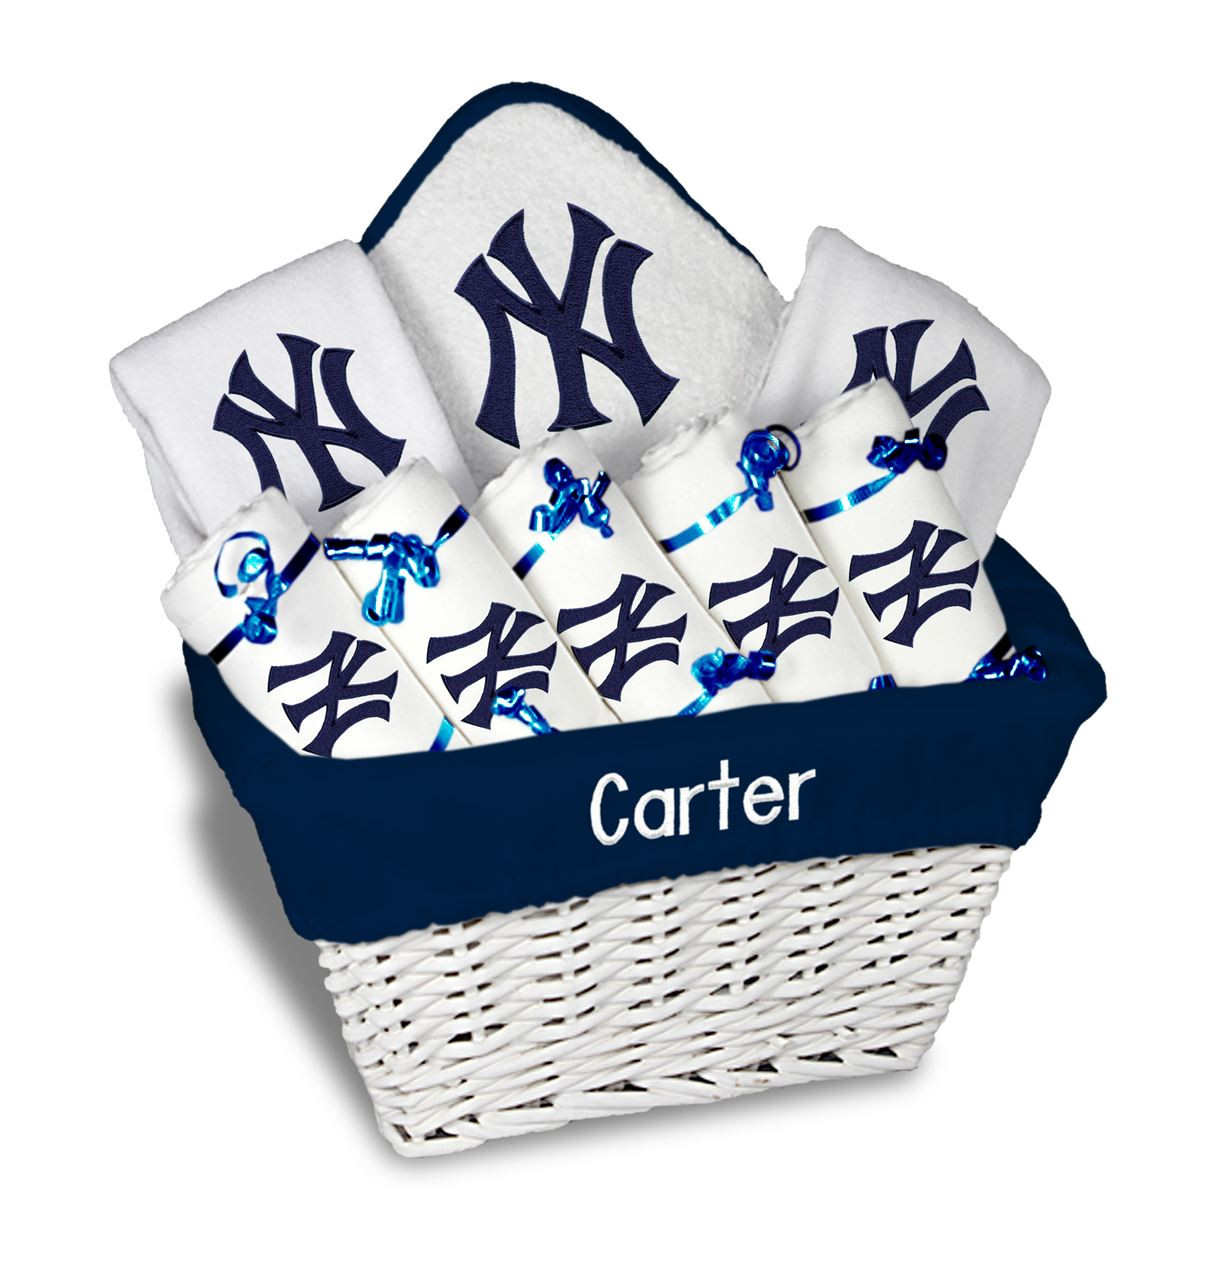 New York Baby Gifts
 Personalized New York Yankees Gift Basket